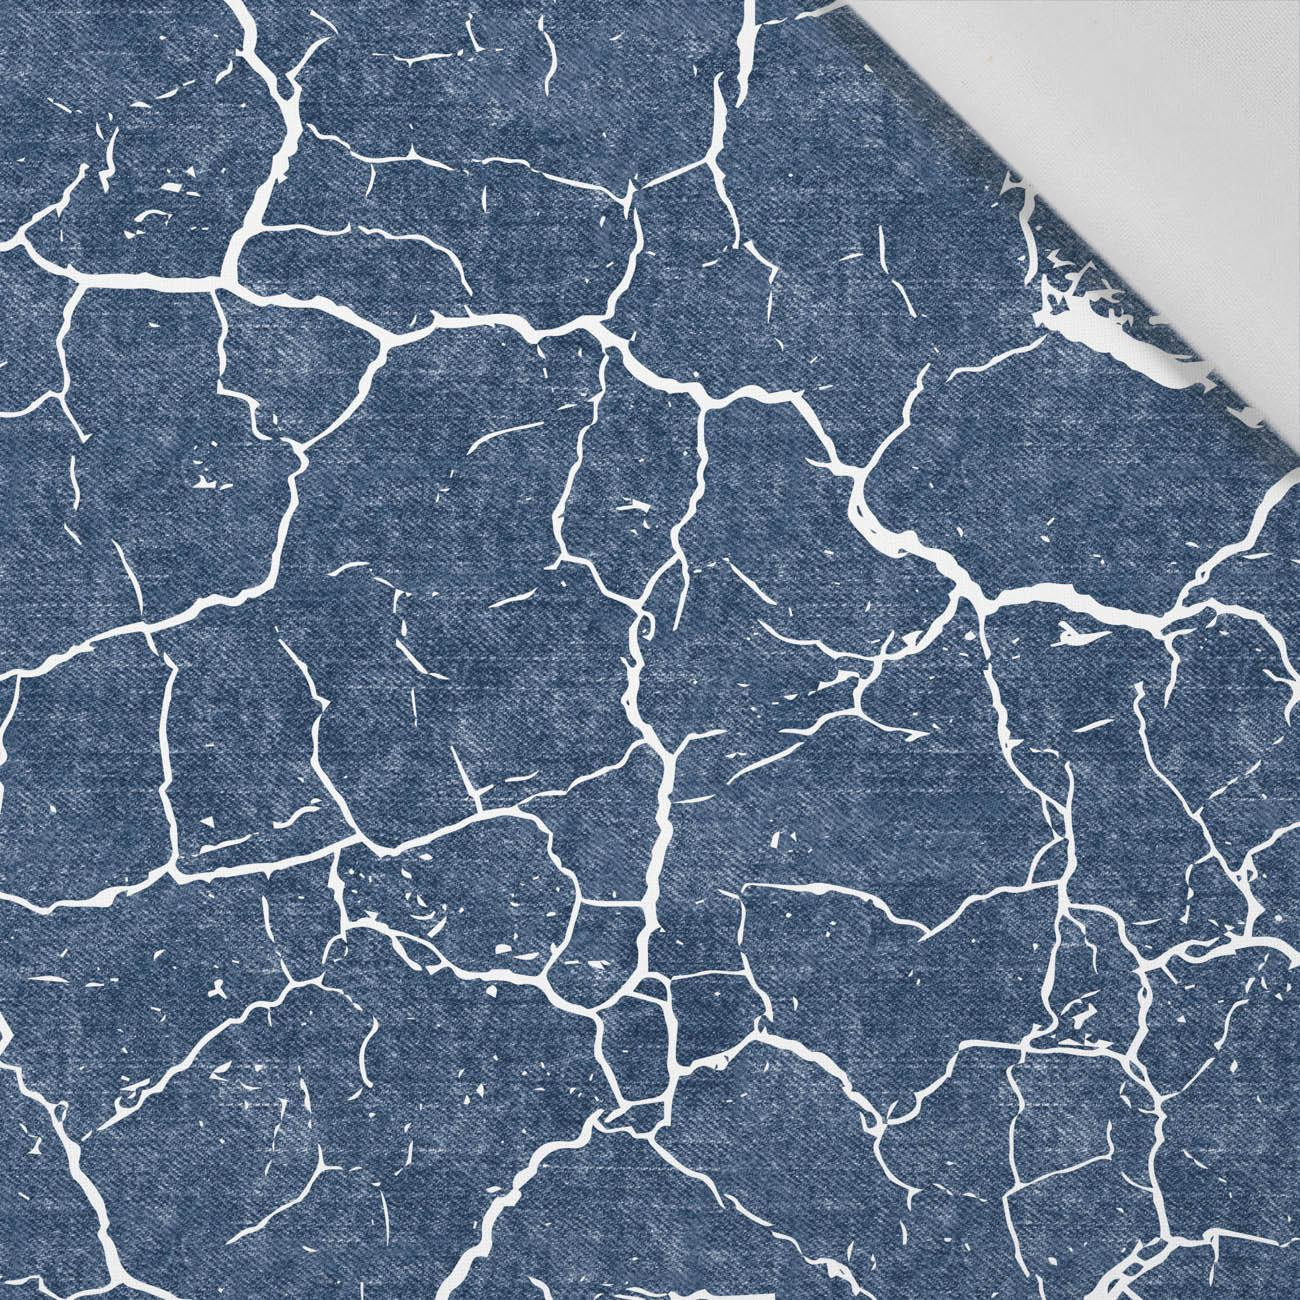 SCORCHED EARTH (white) / ACID WASH (dark blue) - Cotton woven fabric